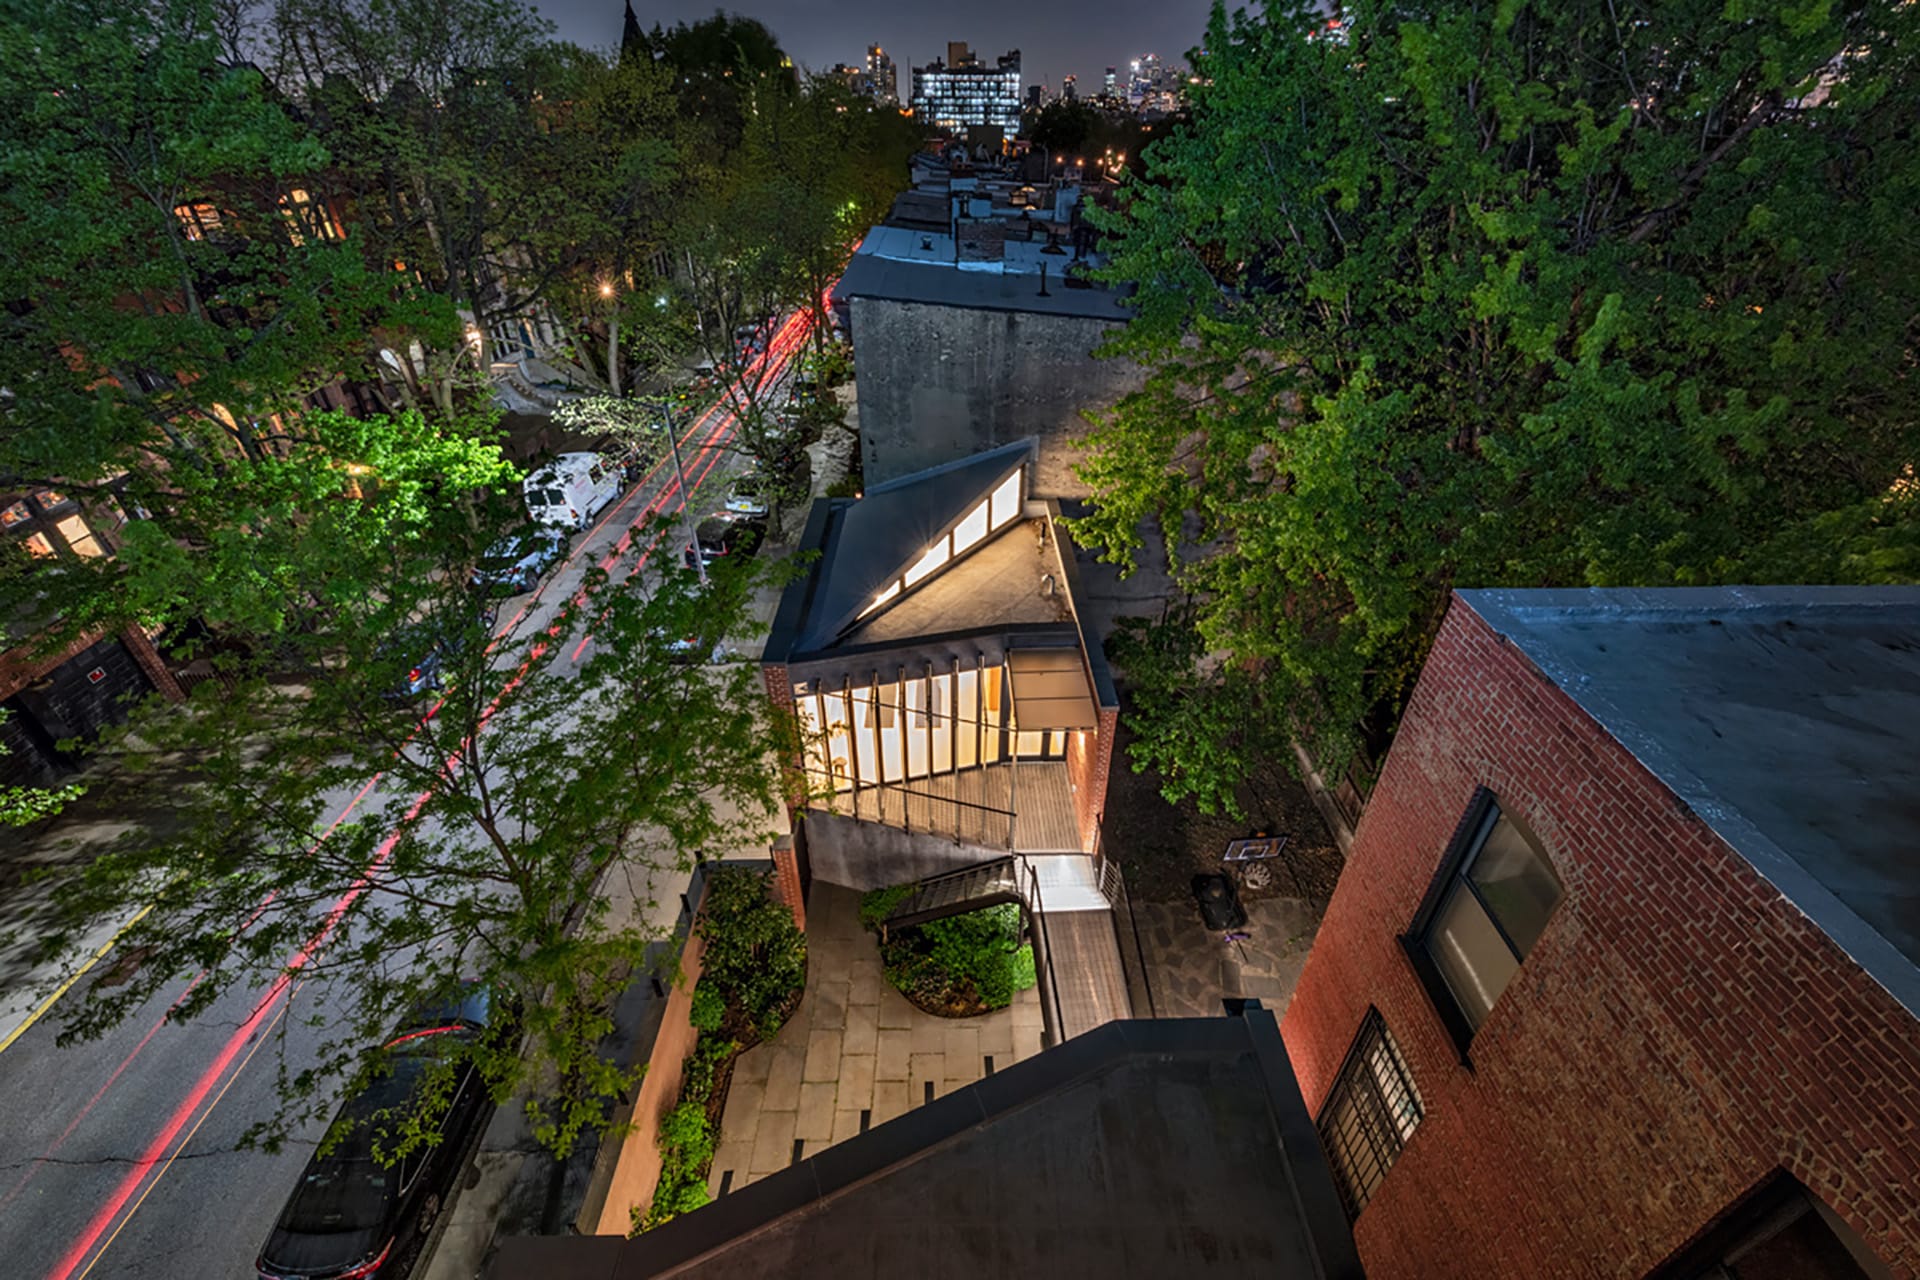 Bird's eye view of the two-story detached garage with angular façade in Park Slope